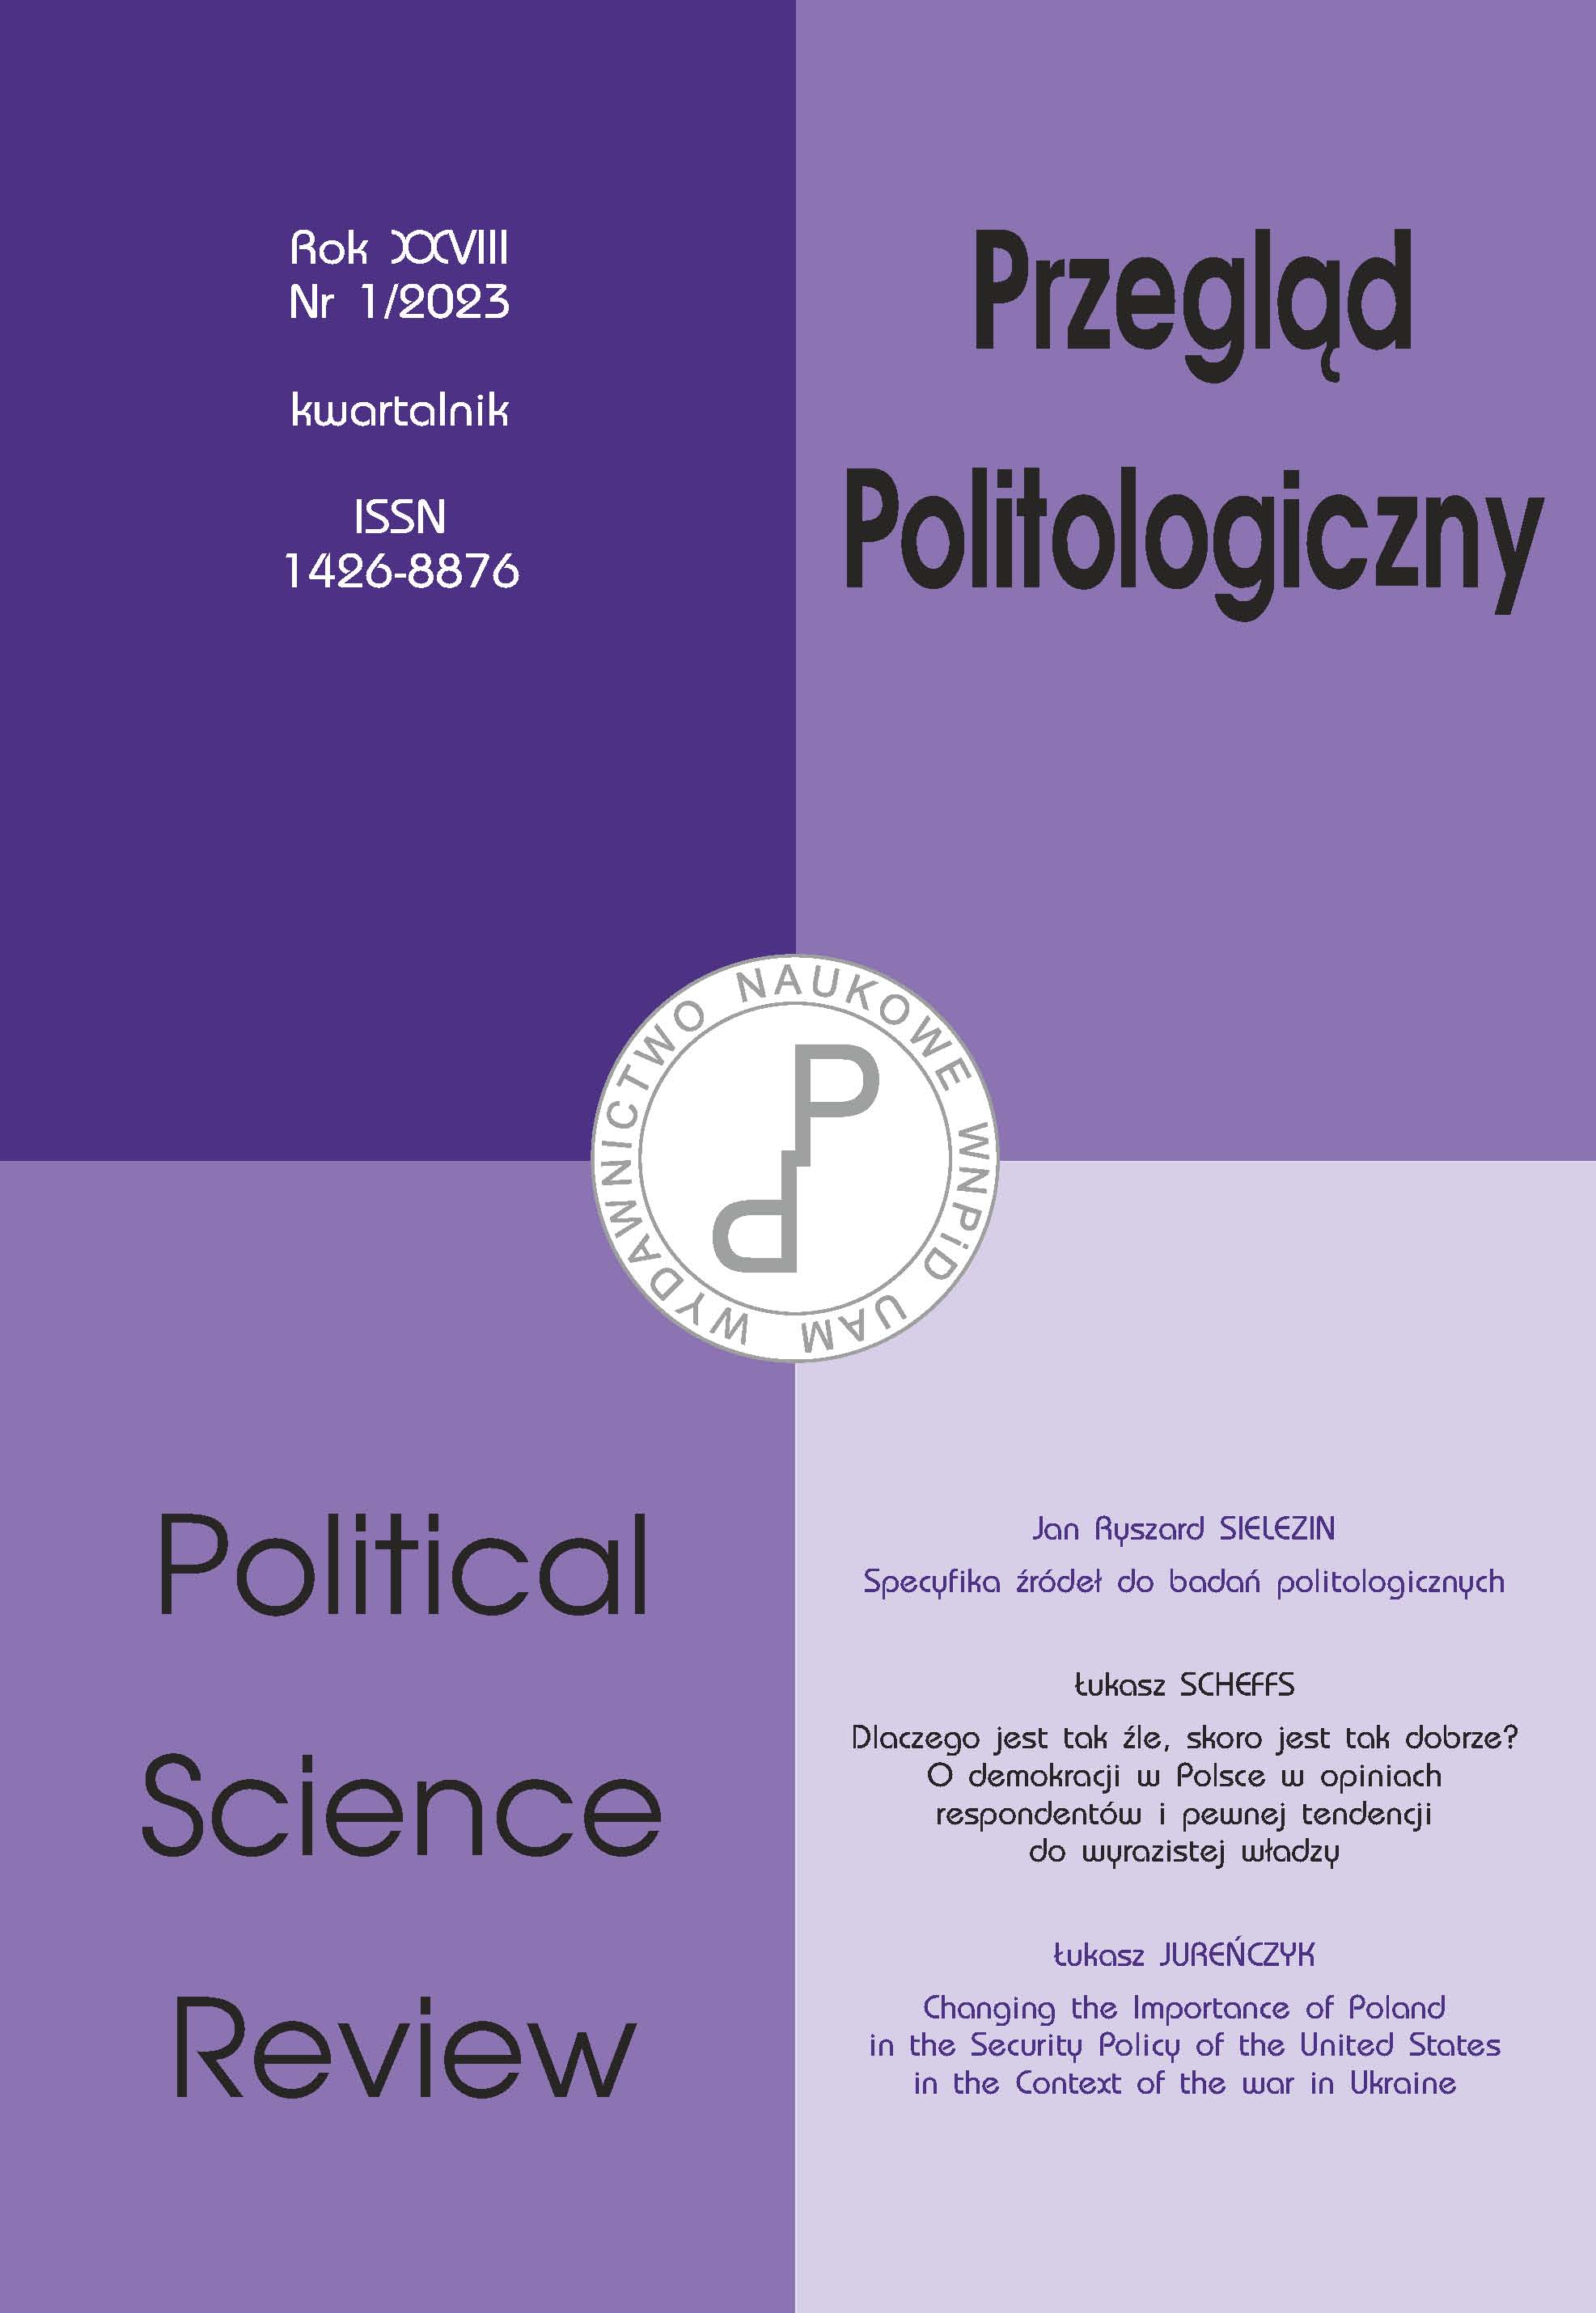 Why is it so bad when it’s so good? About democracy in Poland in the opinions of respondents and a certain tendency towards expressive power Cover Image